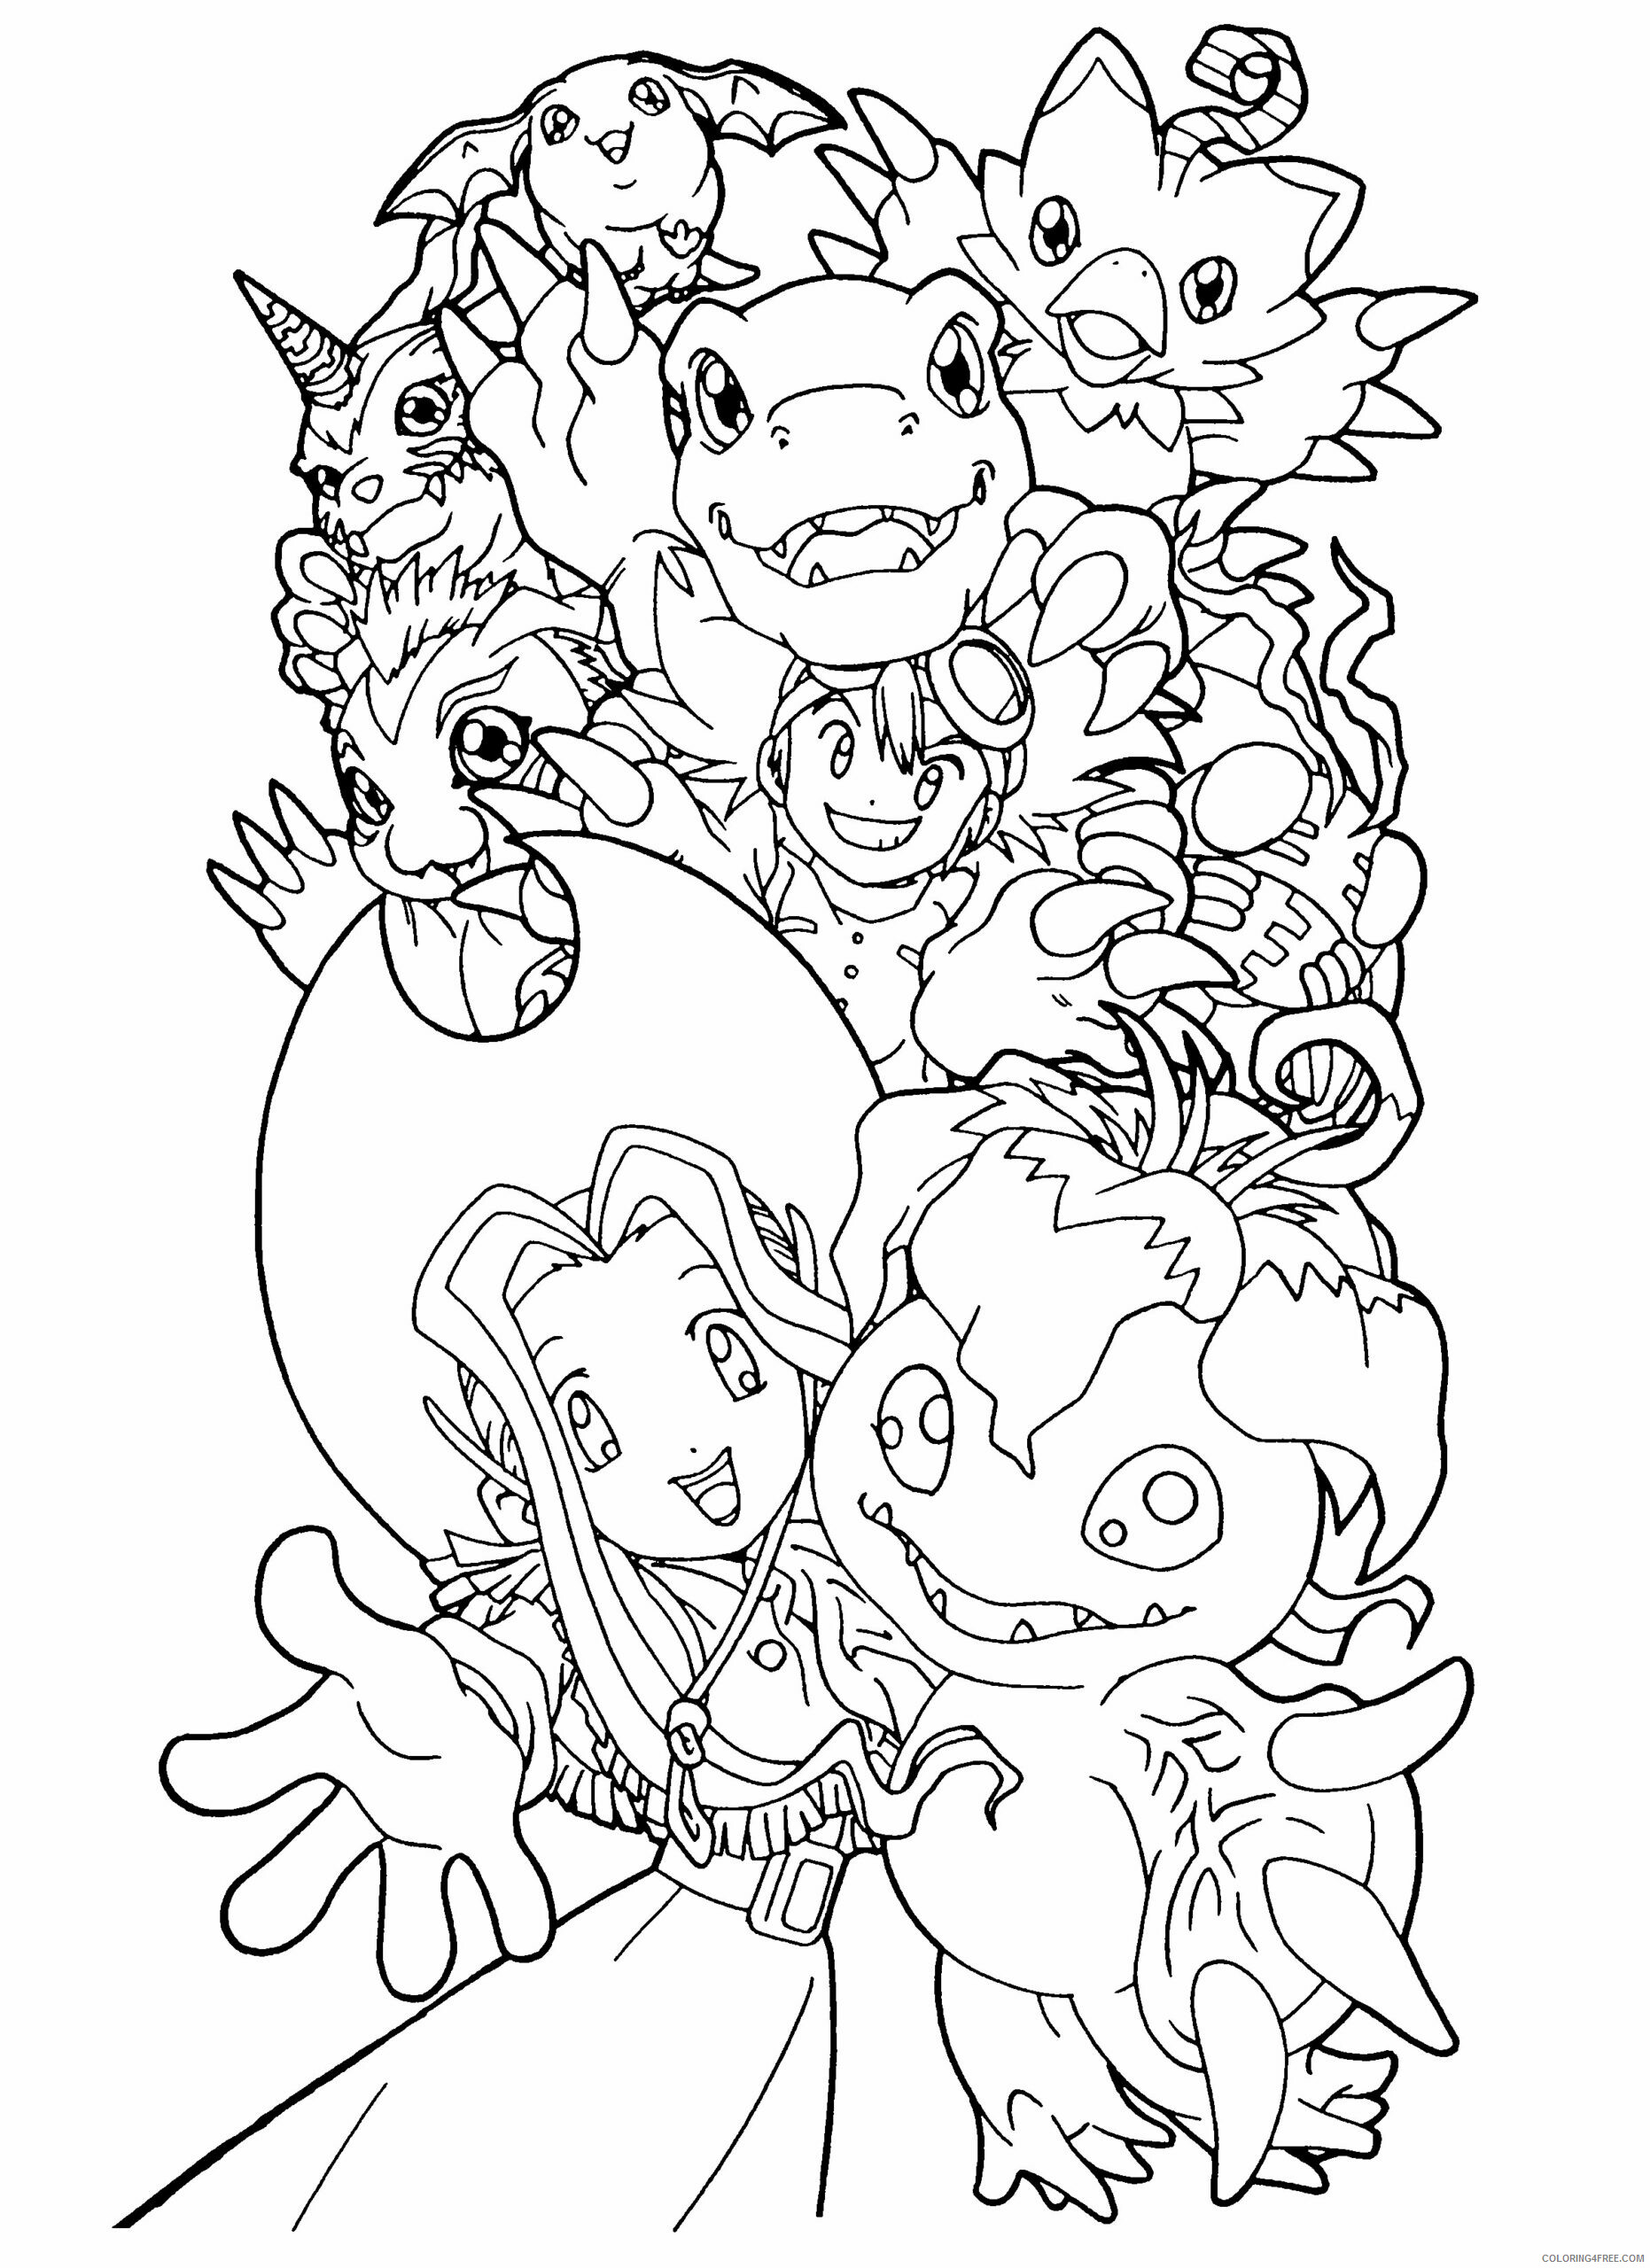 Digimon Printable Coloring Pages Anime digimon 89 2021 0386 Coloring4free